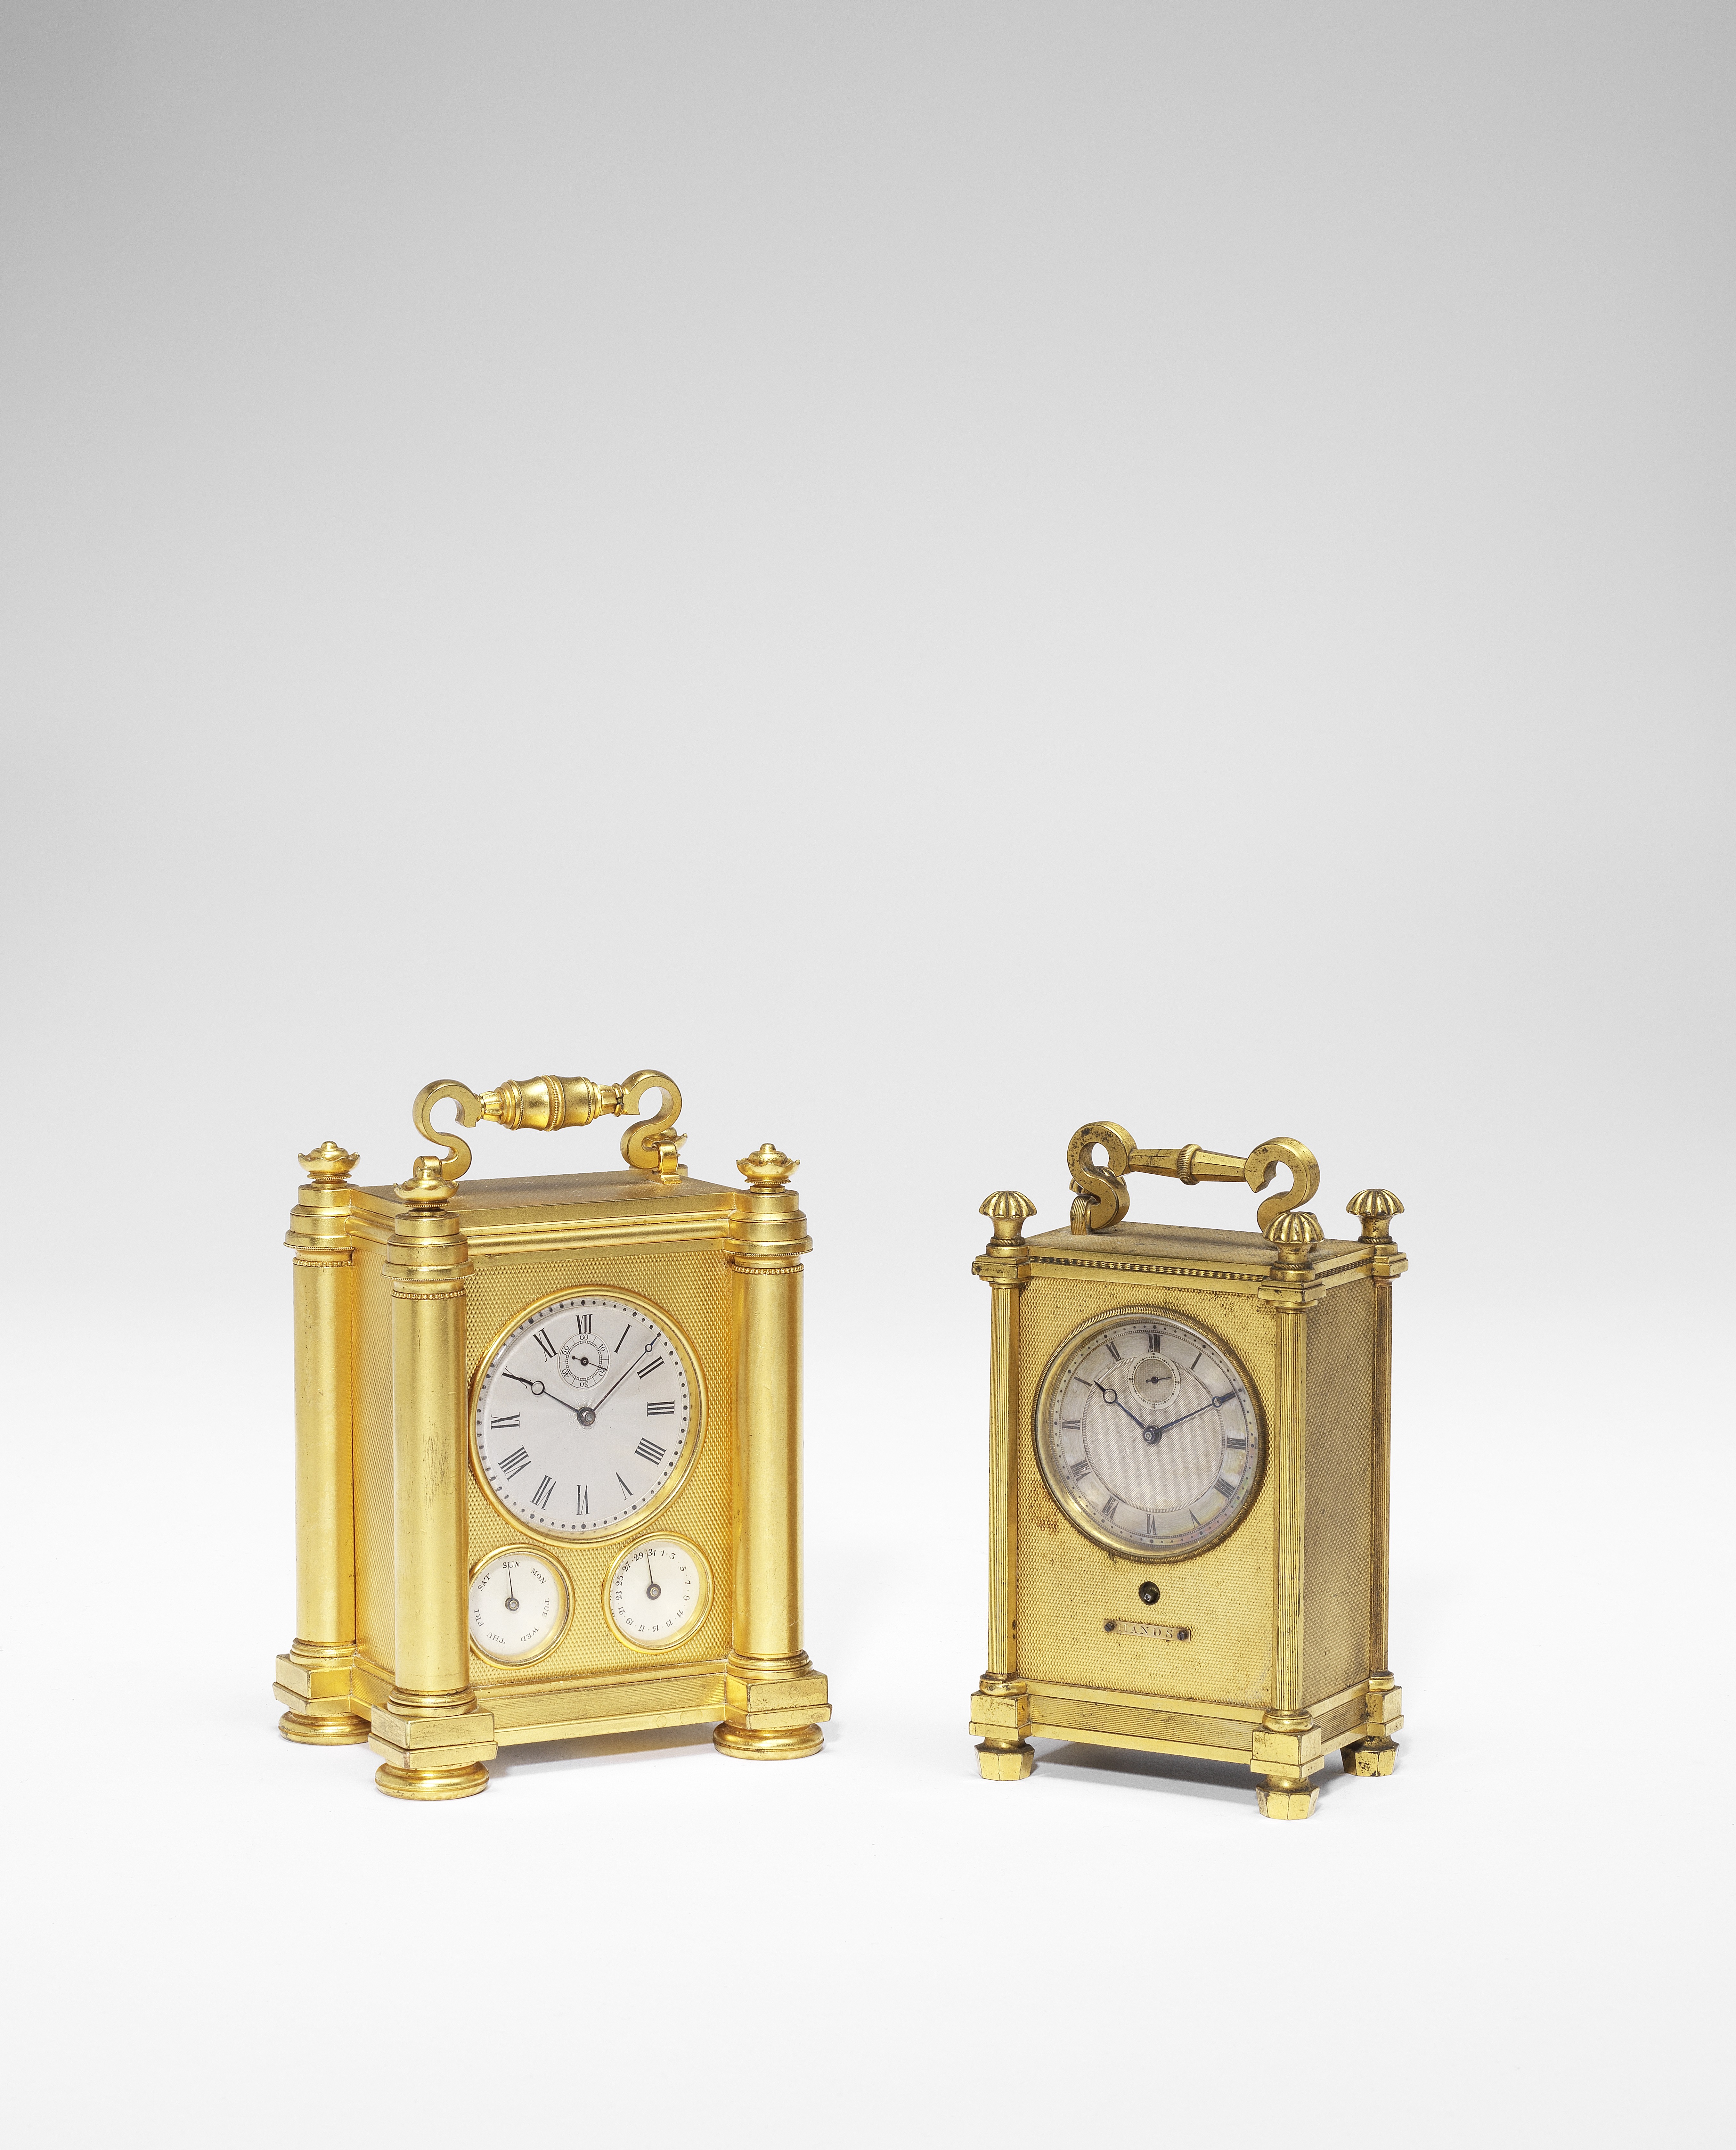 A fine and rare second quarter of the 19th century gilt brass carriage timepiece James F. Cole, N...